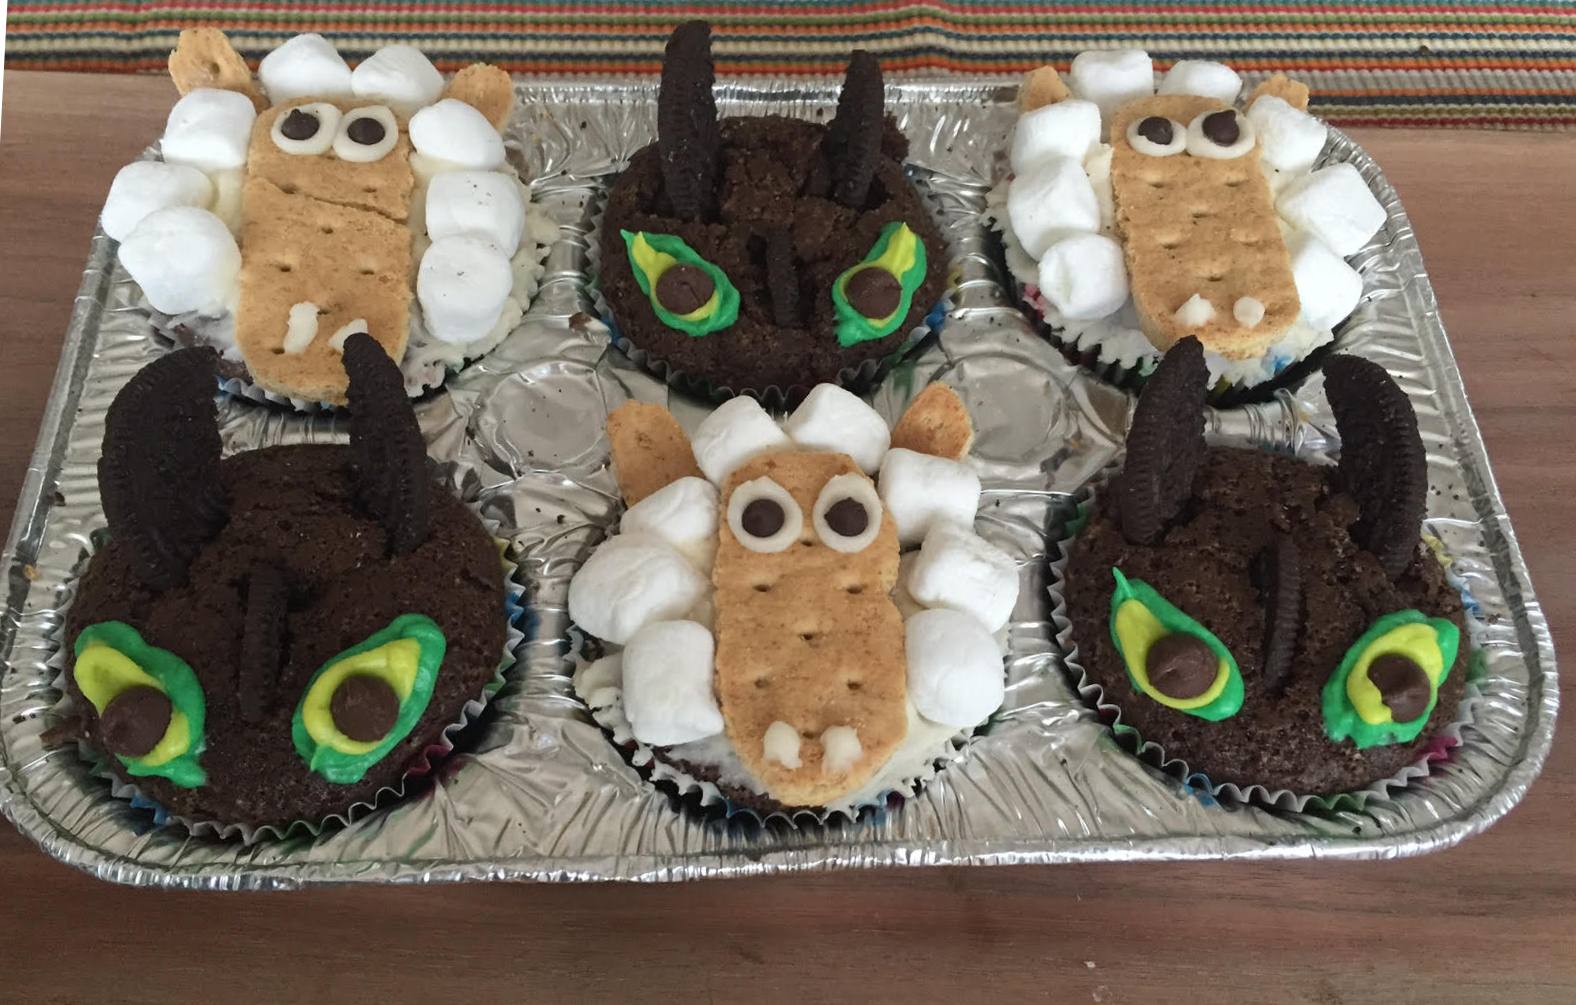 How to train your dragon cake. I used a cupcake pan, overfilled it